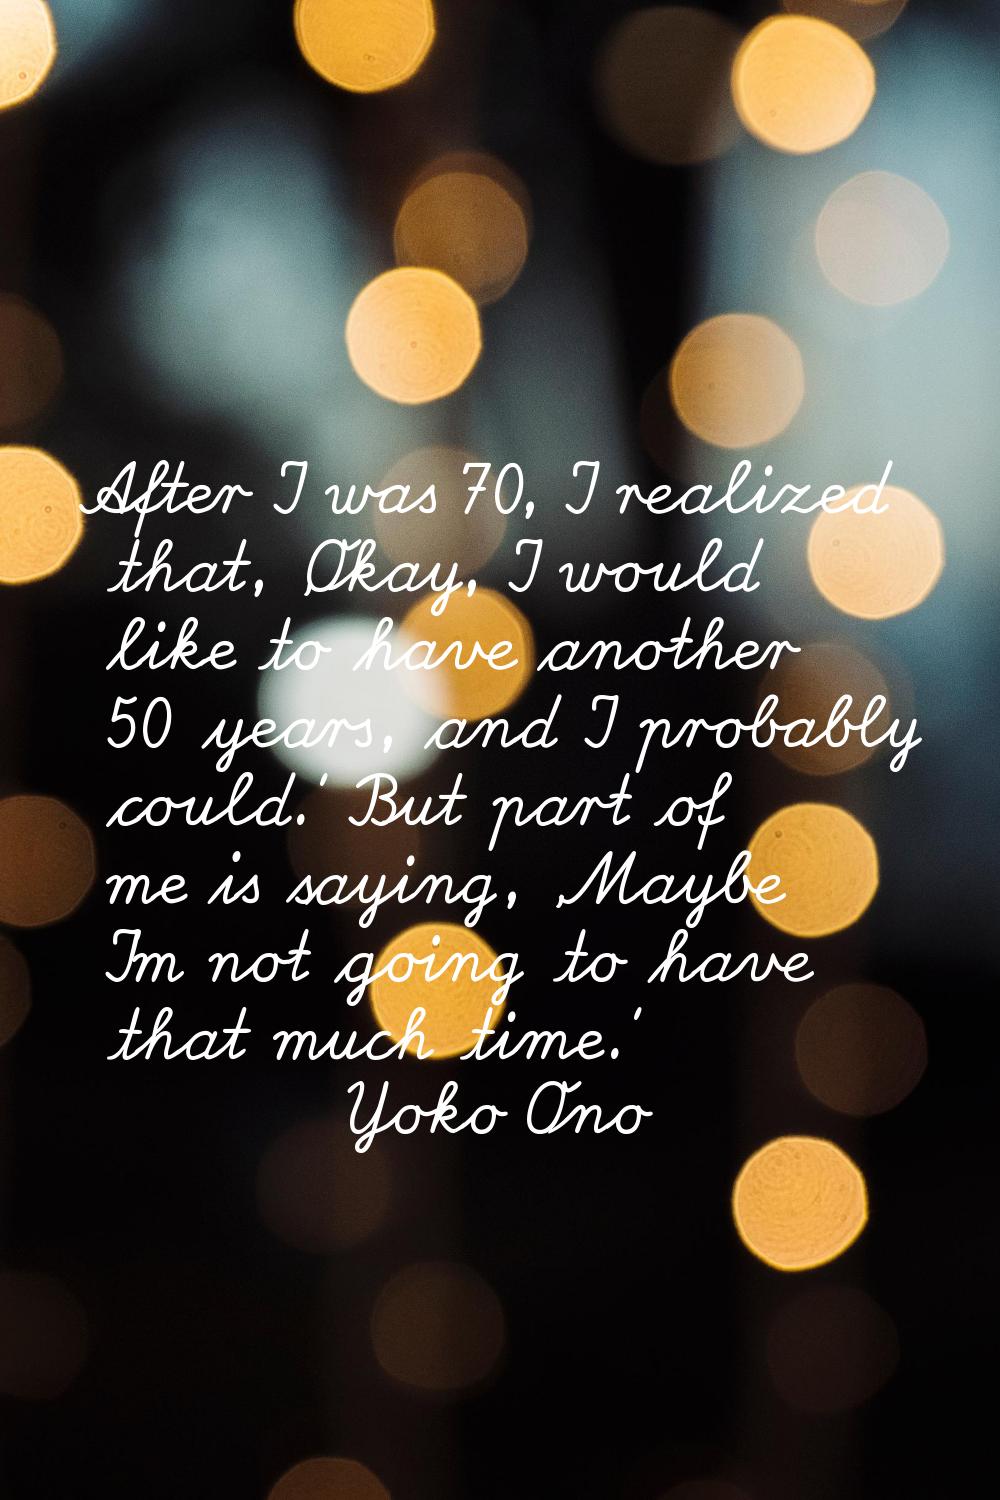 After I was 70, I realized that, 'Okay, I would like to have another 50 years, and I probably could